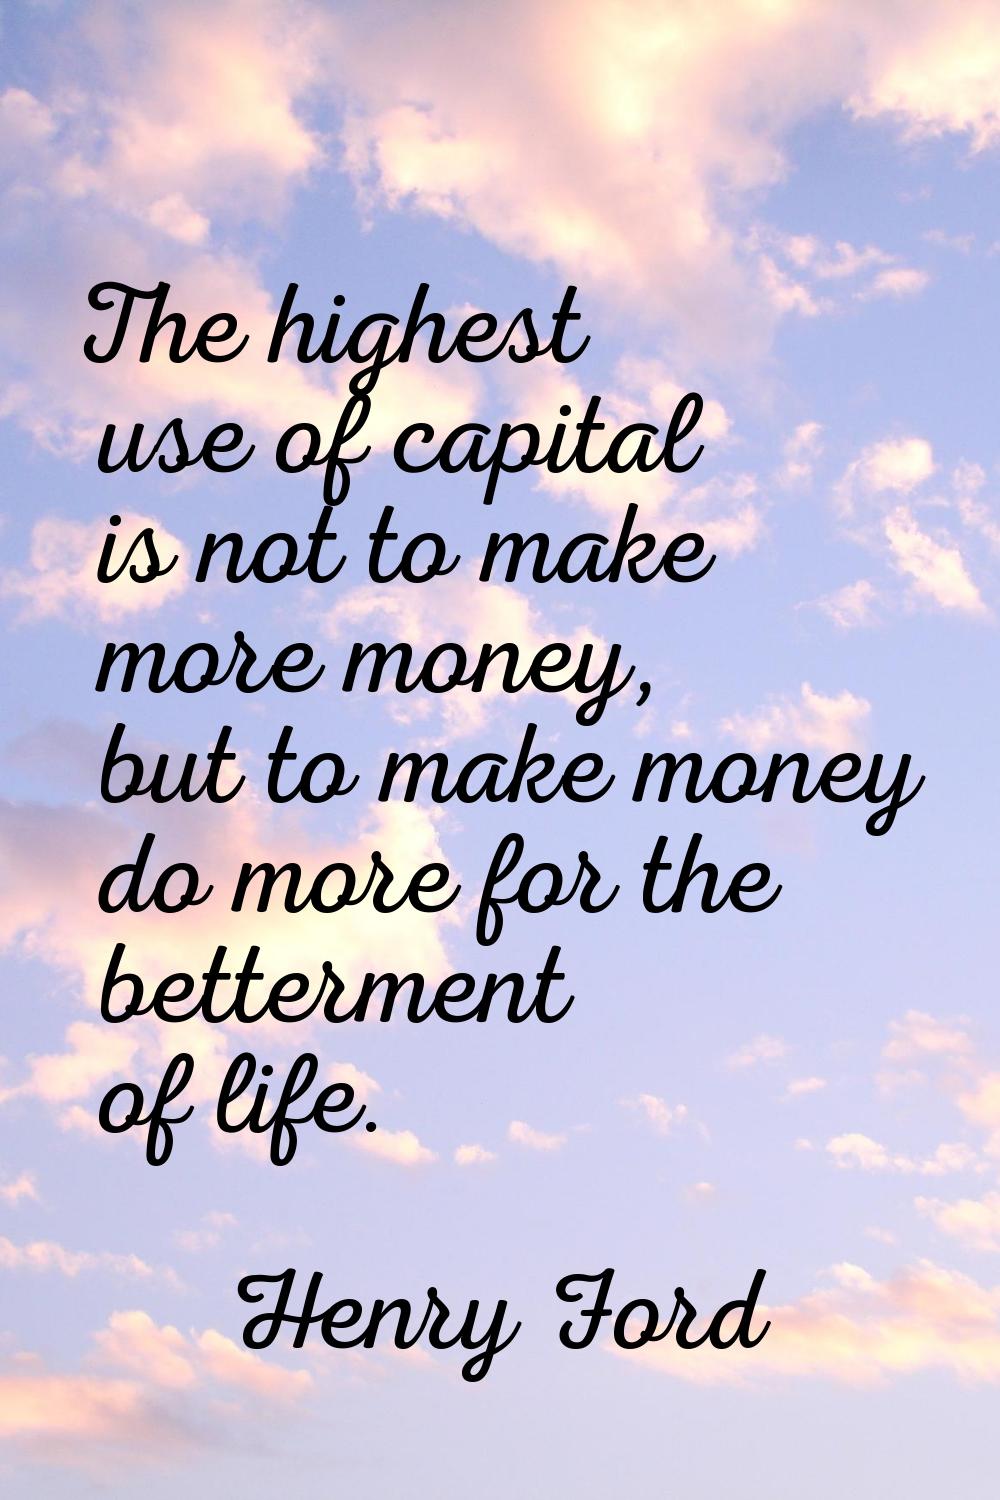 The highest use of capital is not to make more money, but to make money do more for the betterment 